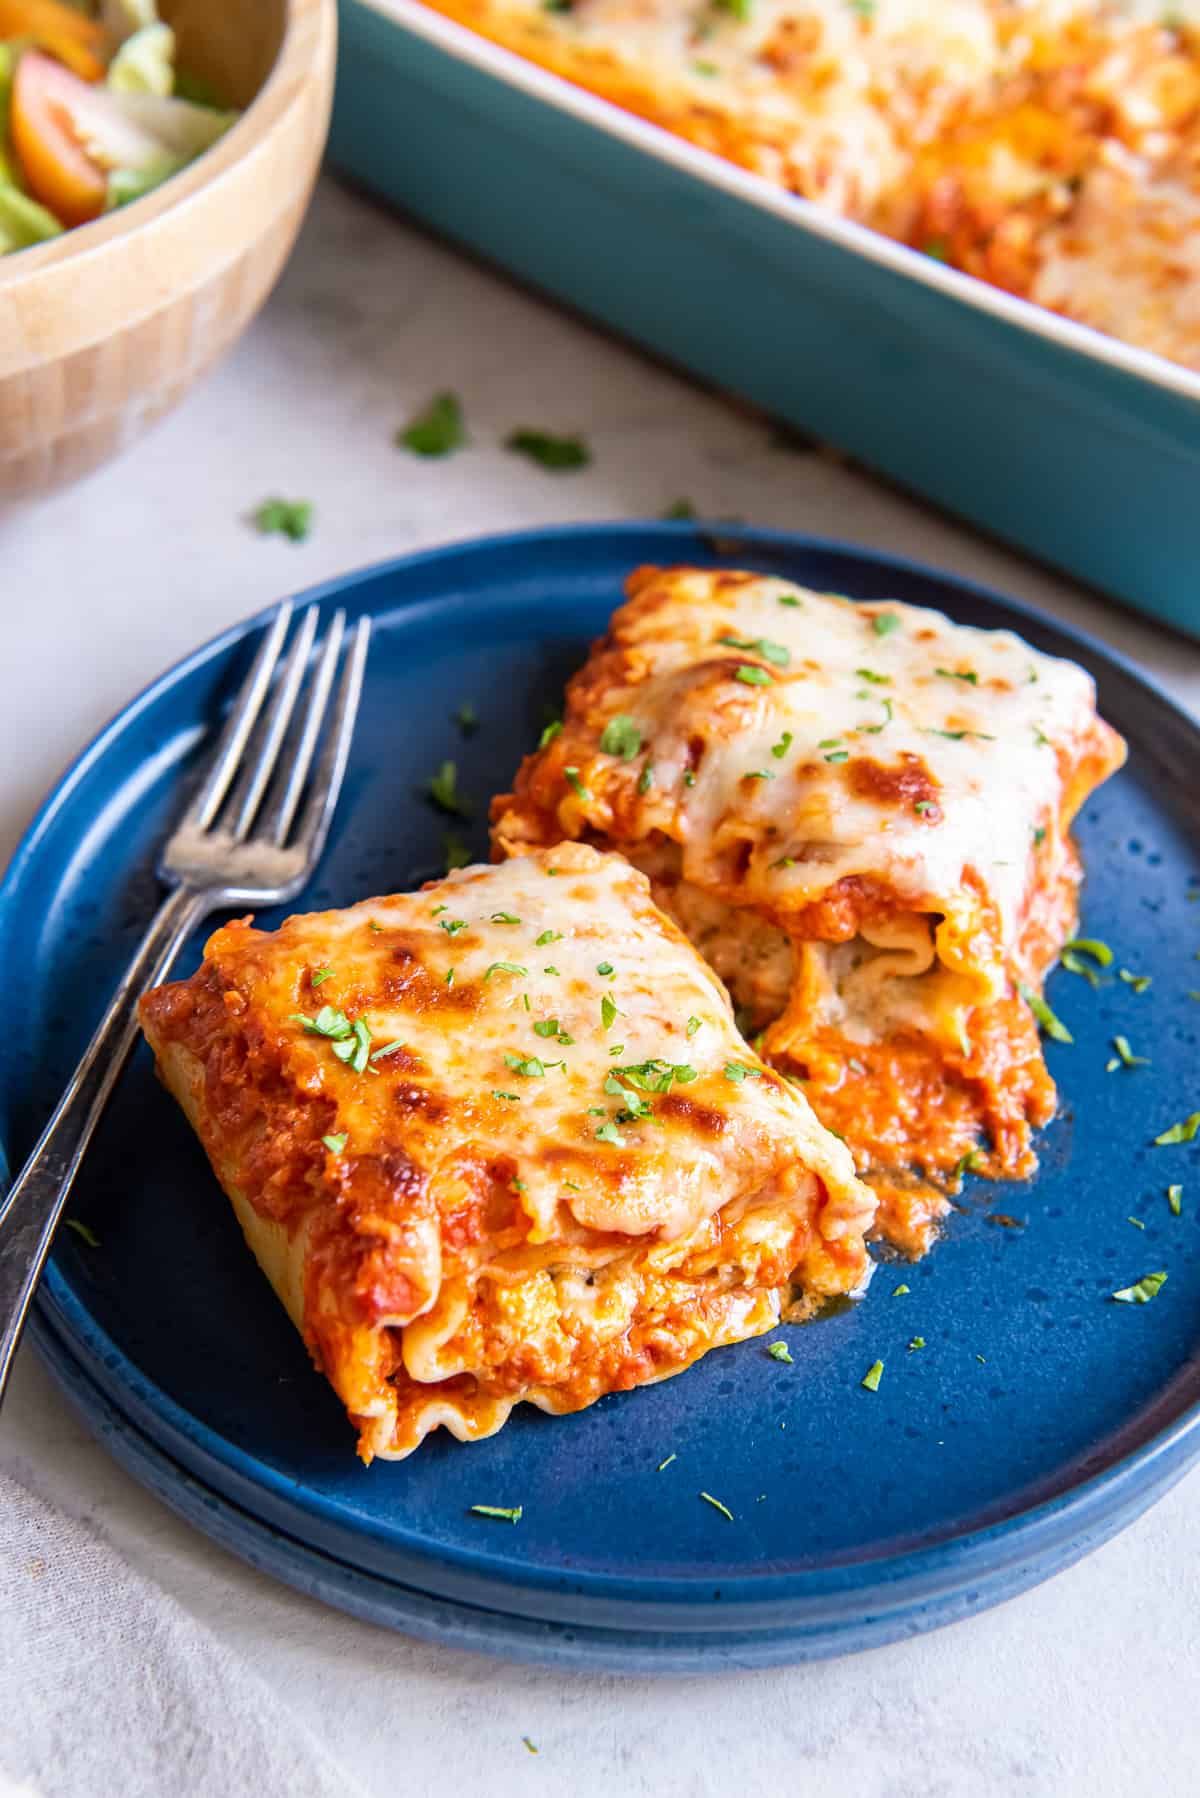 Two chicken lasagna roll ups on a blue plate with a fork.